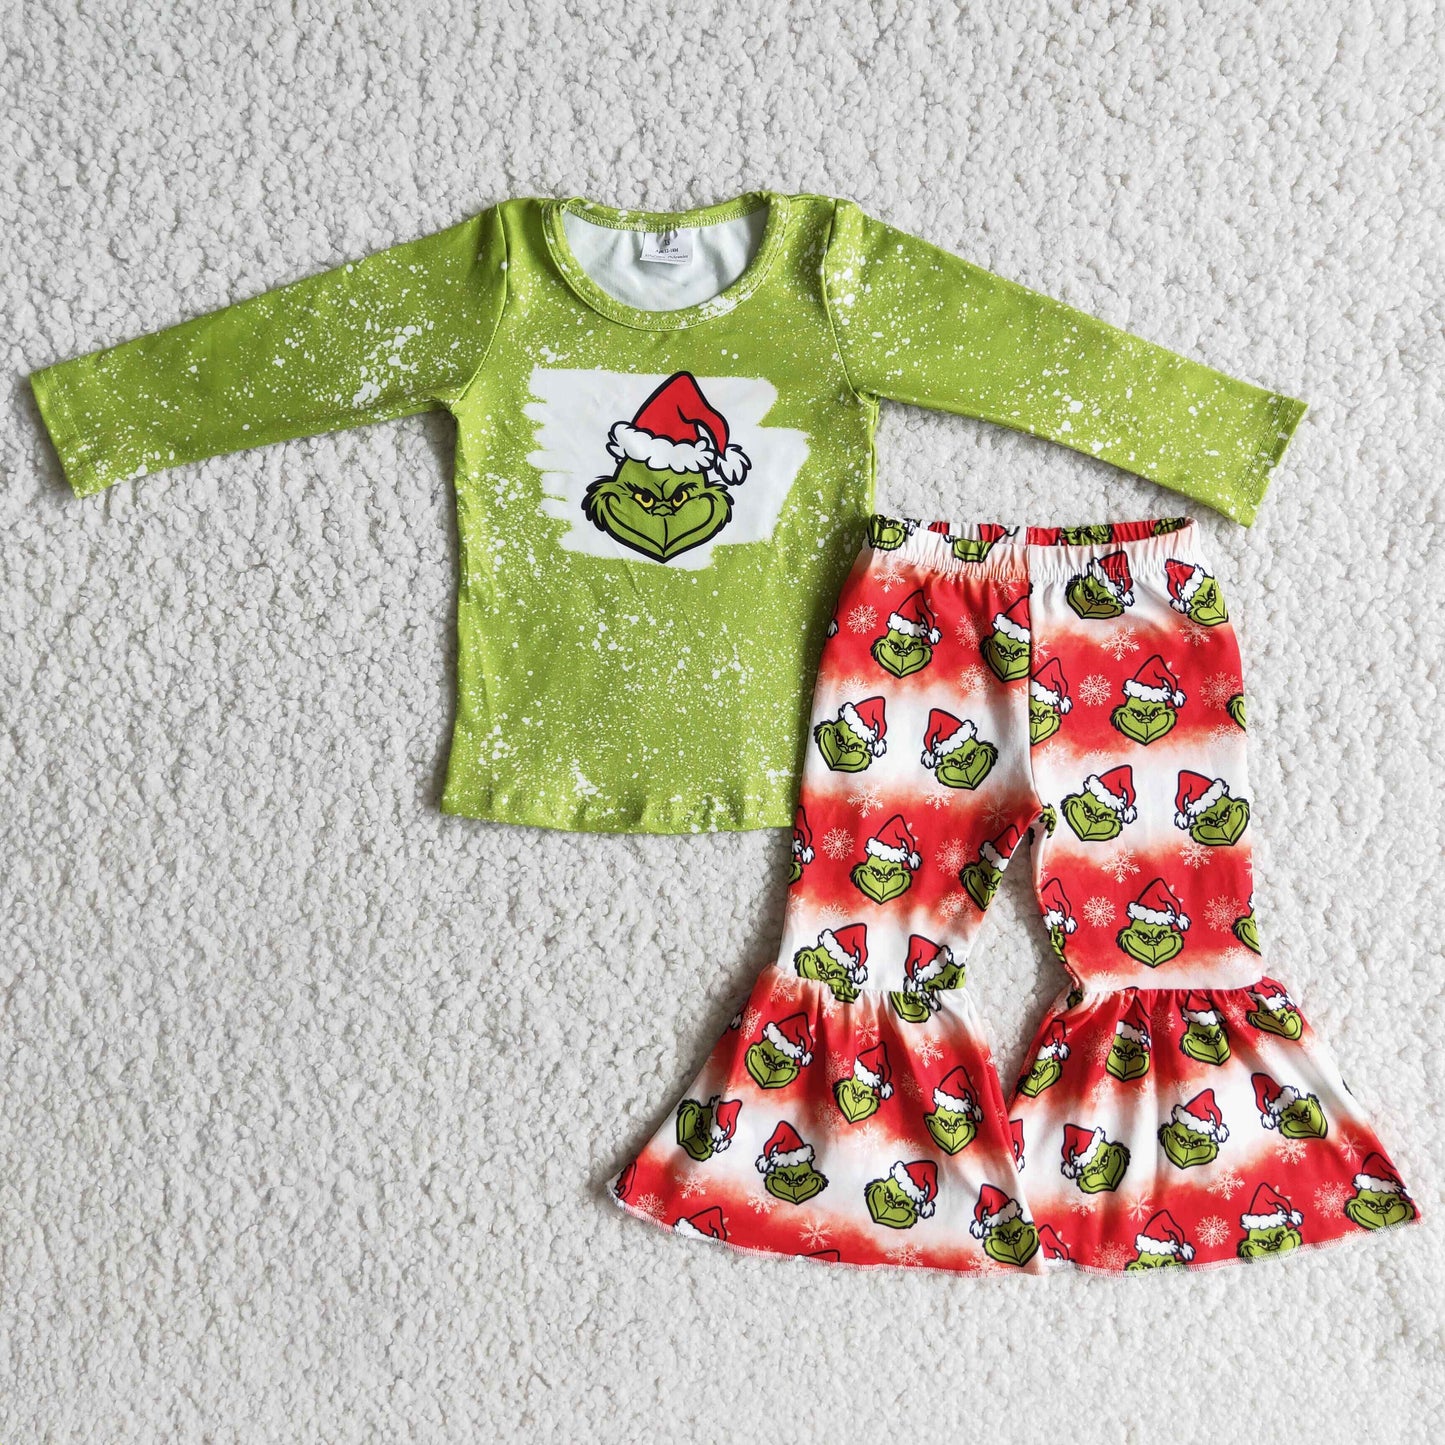 Green Shirt Red Bells Outfit for Christmas